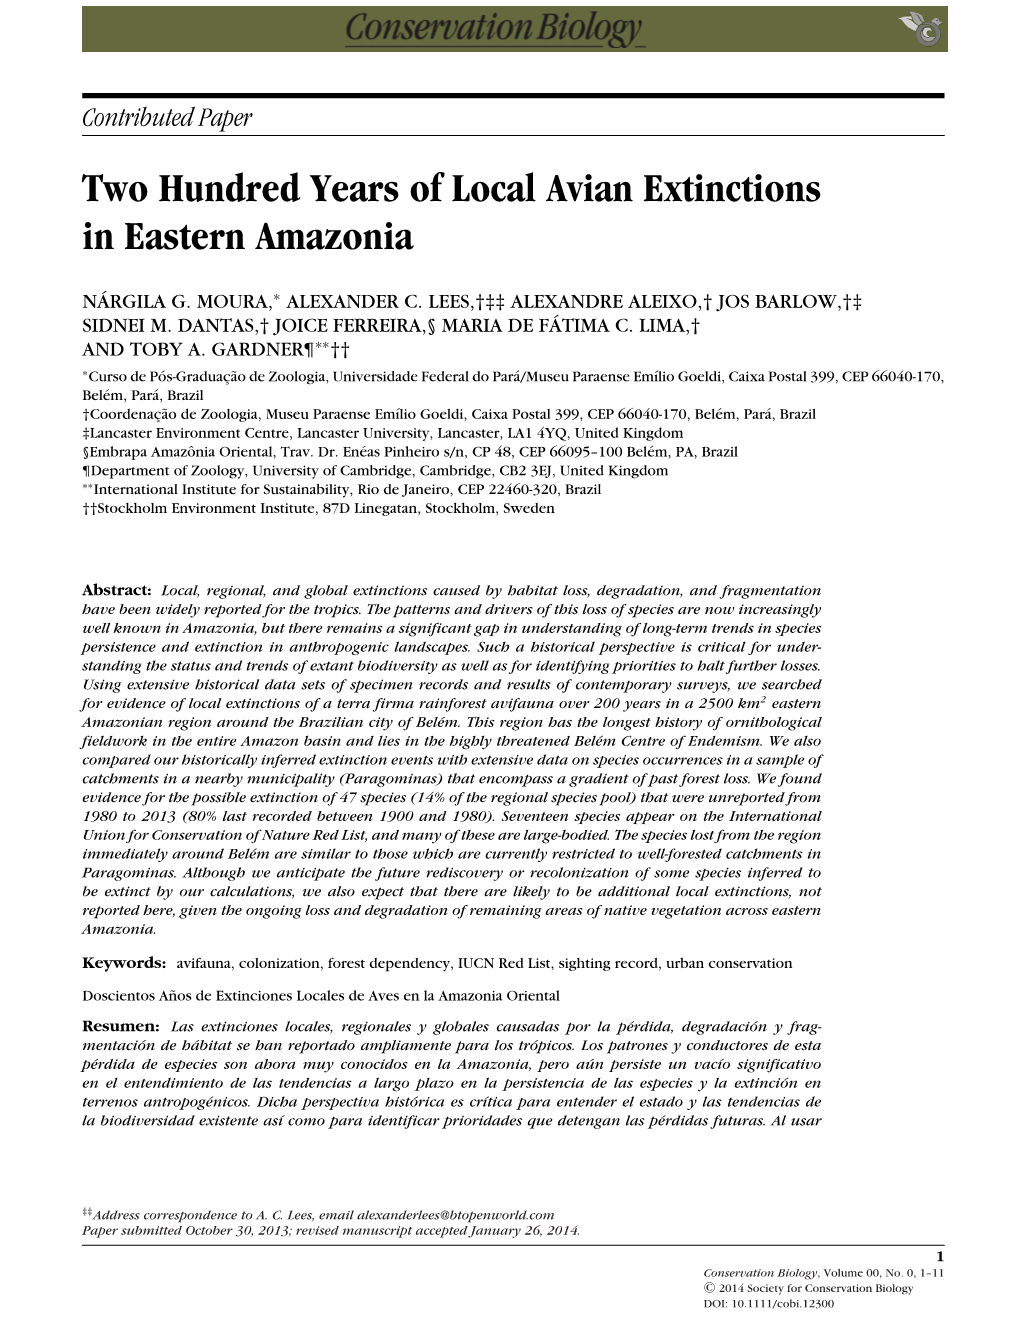 Two Hundred Years of Local Avian Extinctions in Eastern Amazonia